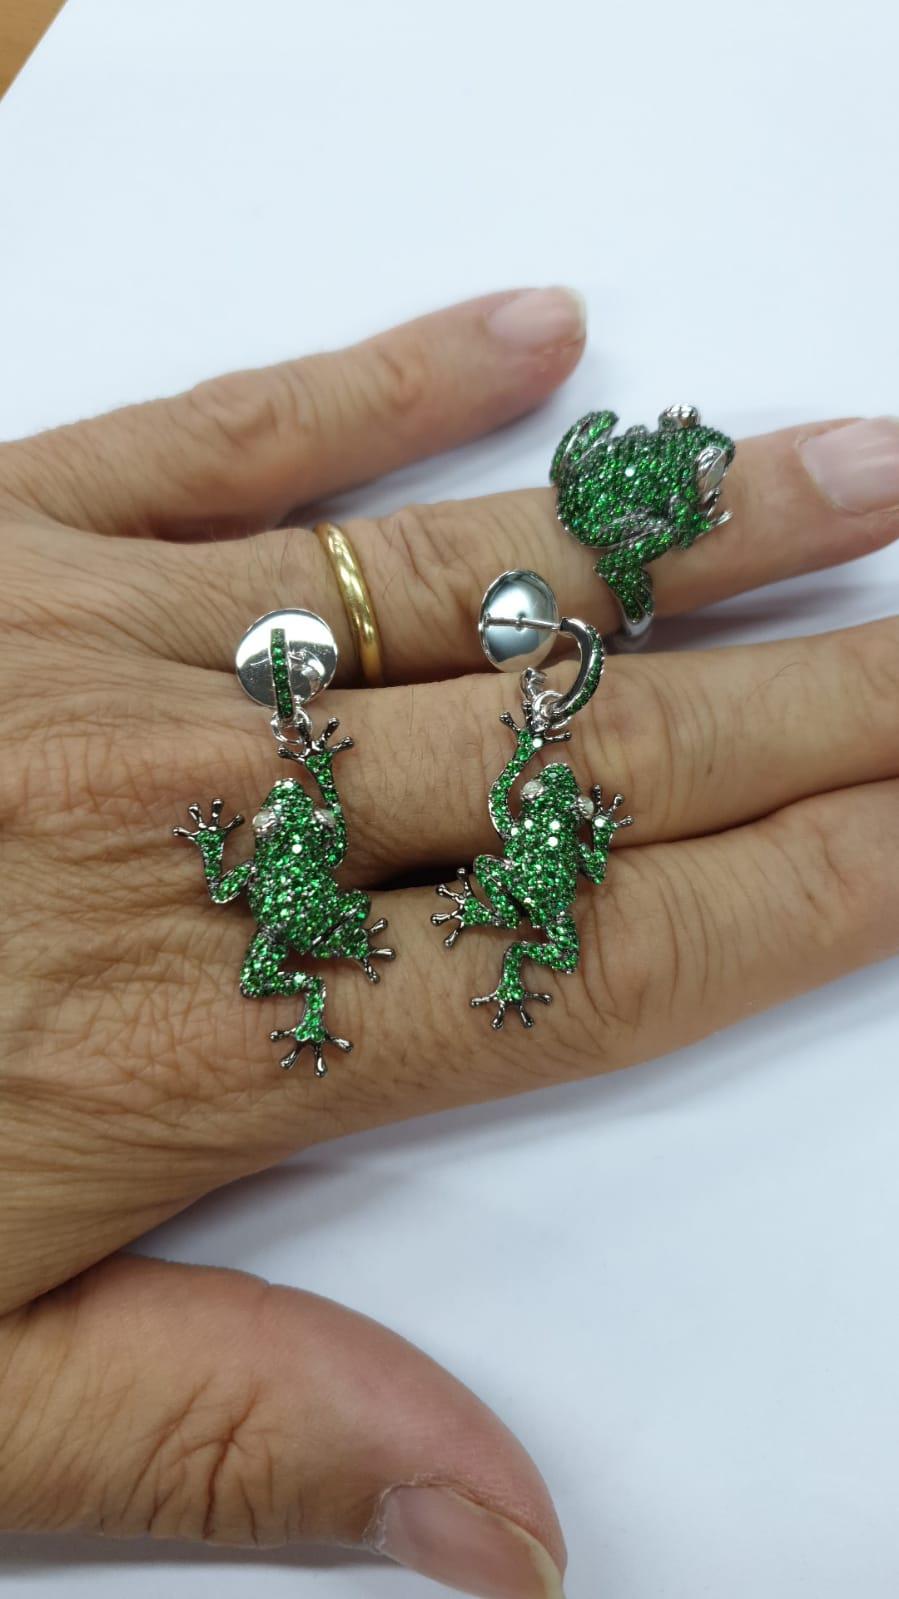 Matching Ring Available

When it comes to jewellery, frogs are most definitely lucky charms. The frog is a Native American symbol of wealth and prosperity. ... Owning and wearing an item of frog jewellery opens your spirit to good fortune and